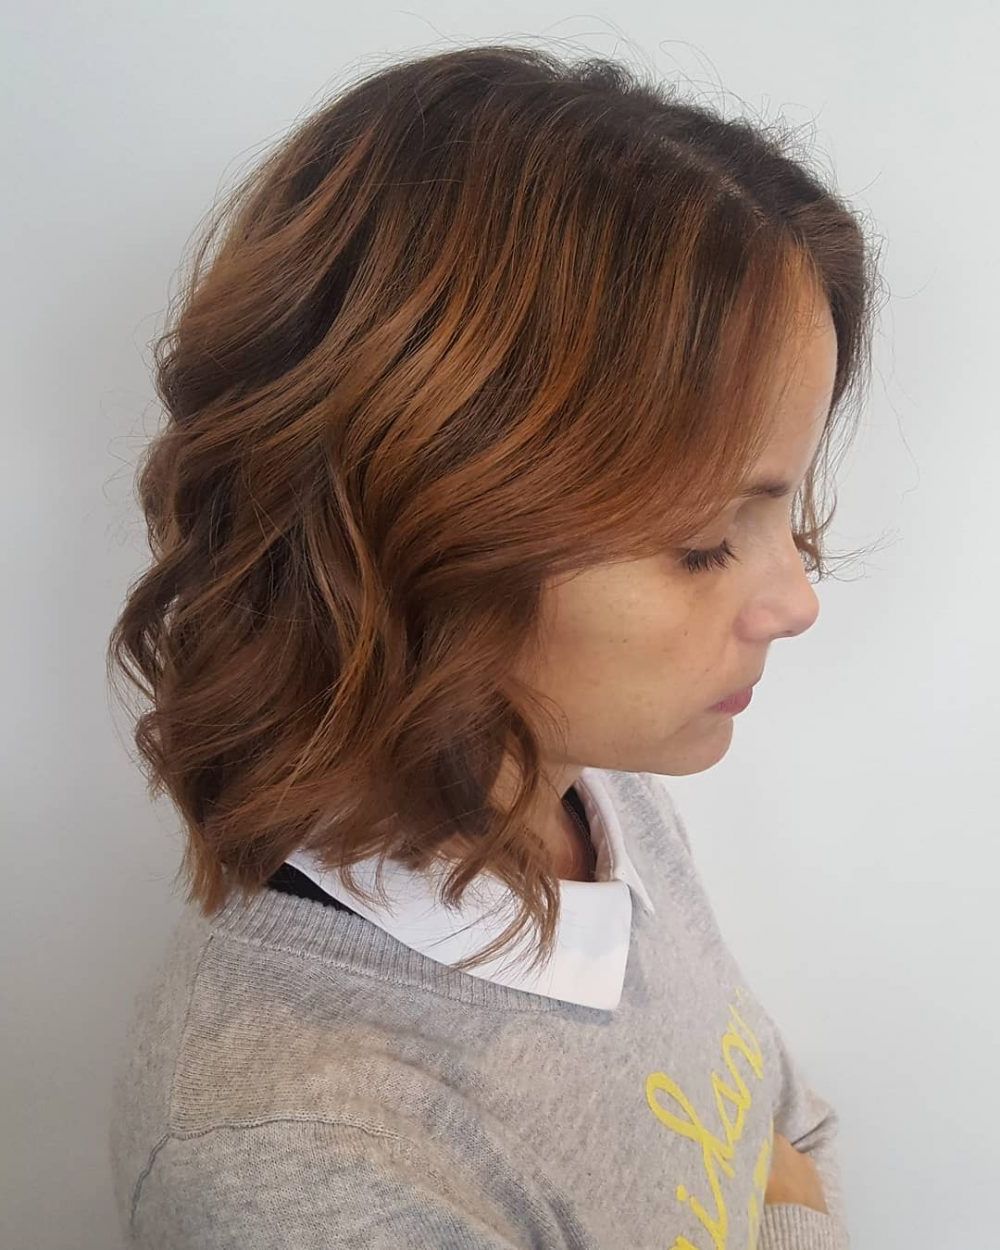 43 Greatest Wavy Bob Hairstyles – Short, Medium And Long In 2018 Pertaining To Nape Length Brown Bob Hairstyles With Messy Curls (View 19 of 25)